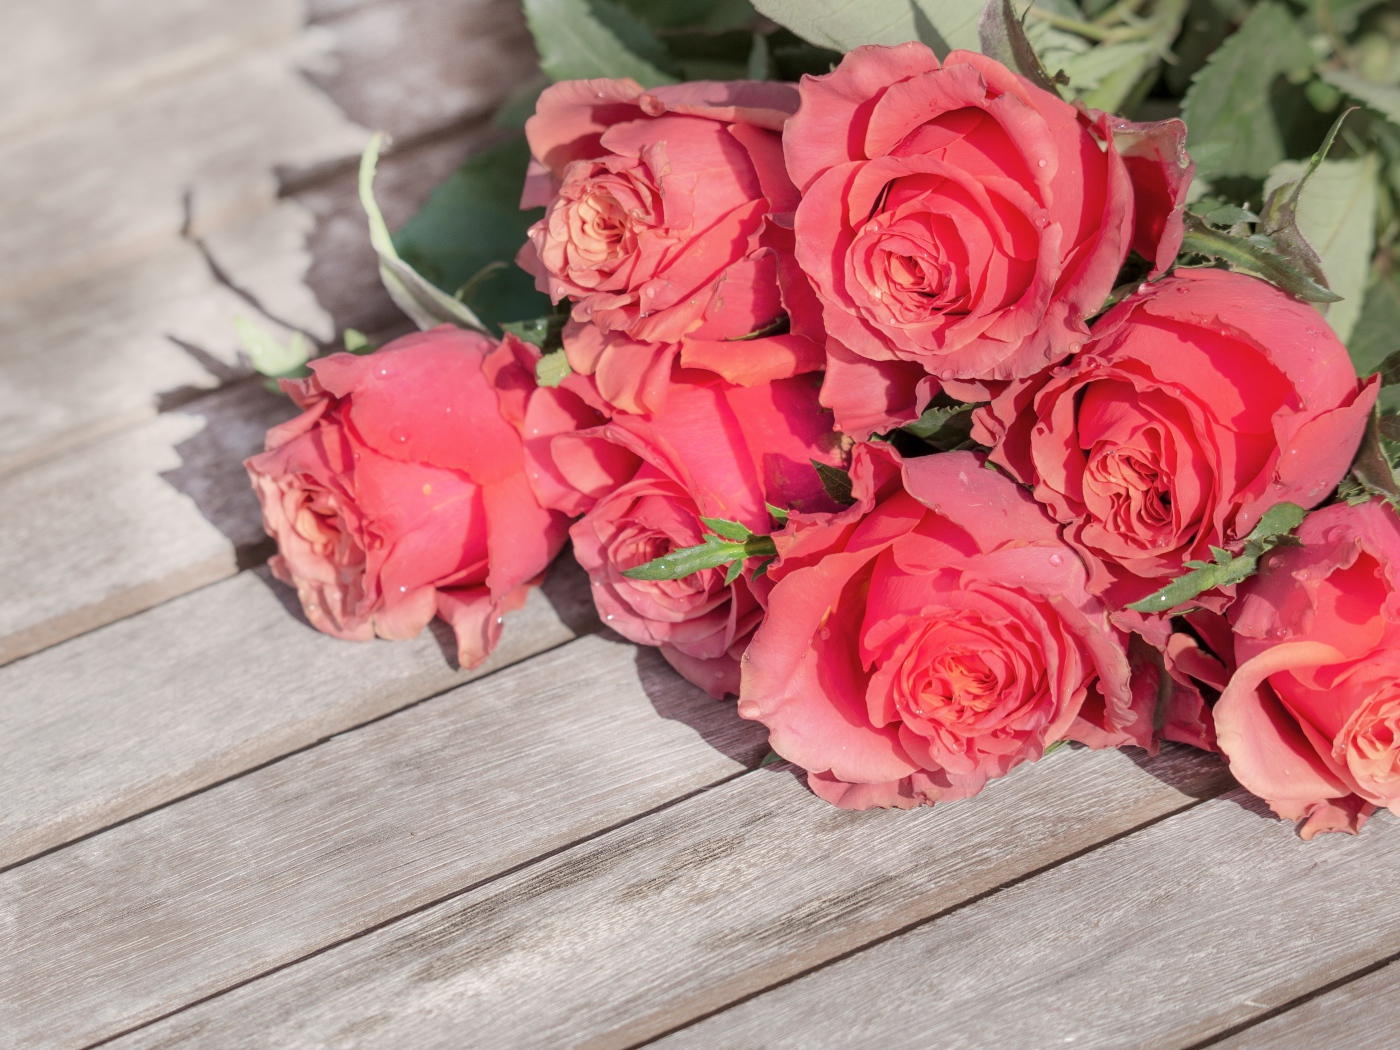 2018Nature___Flowers_A_bouquet_of_pink_roses_lies_on_a_wooden_surface_127292_22.jpg